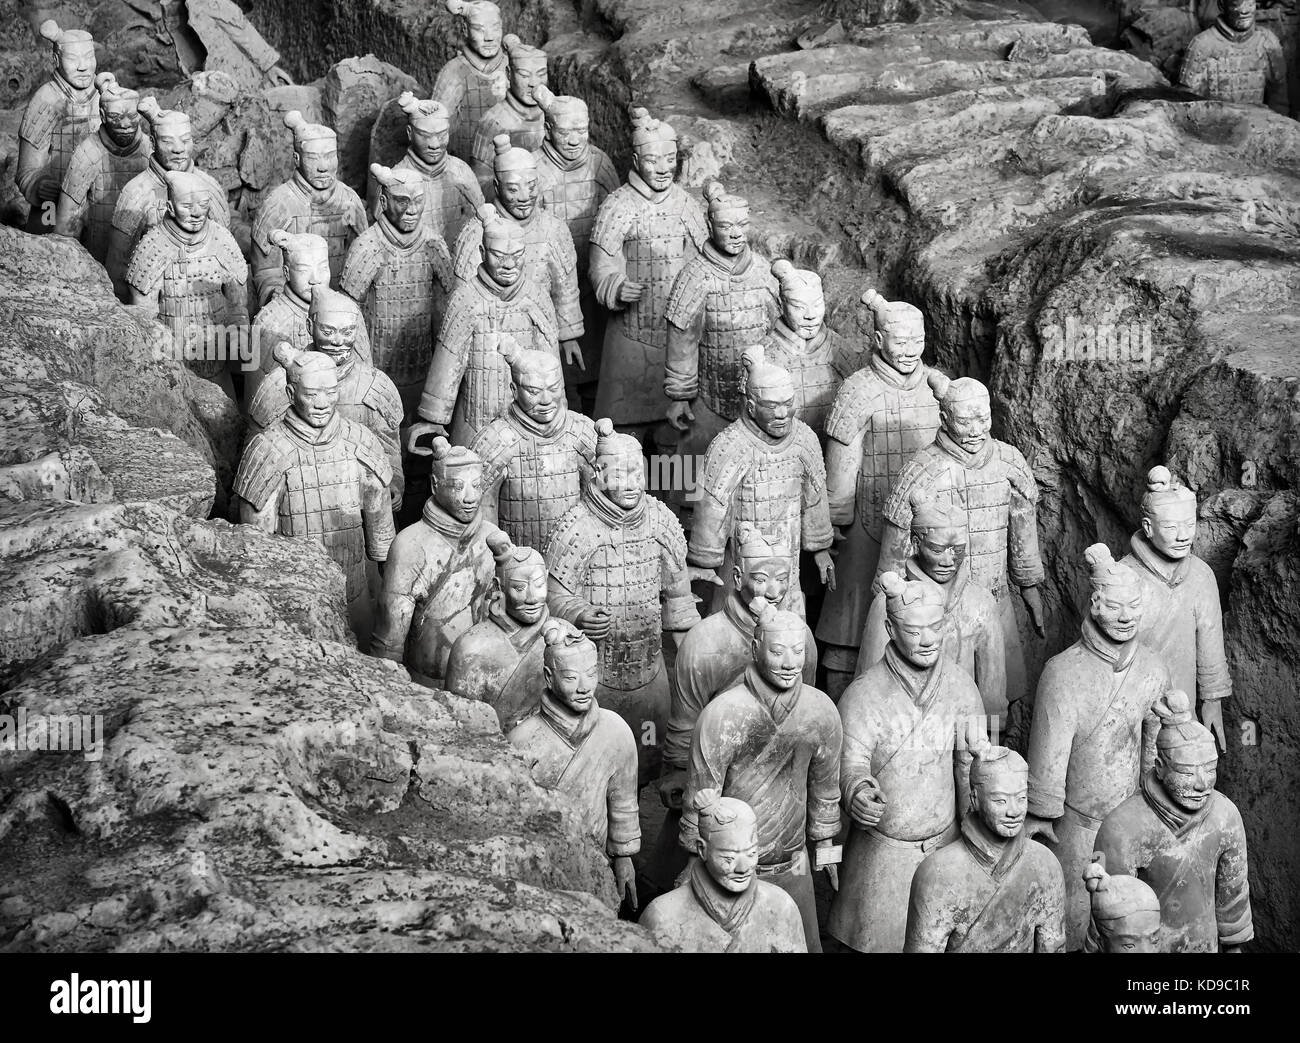 Xian, China - October 4, 2017: Terracotta Army warriors. Discovered in 1974 three pits contain more than 8000 soldiers of Qin Shi Huang. Stock Photo